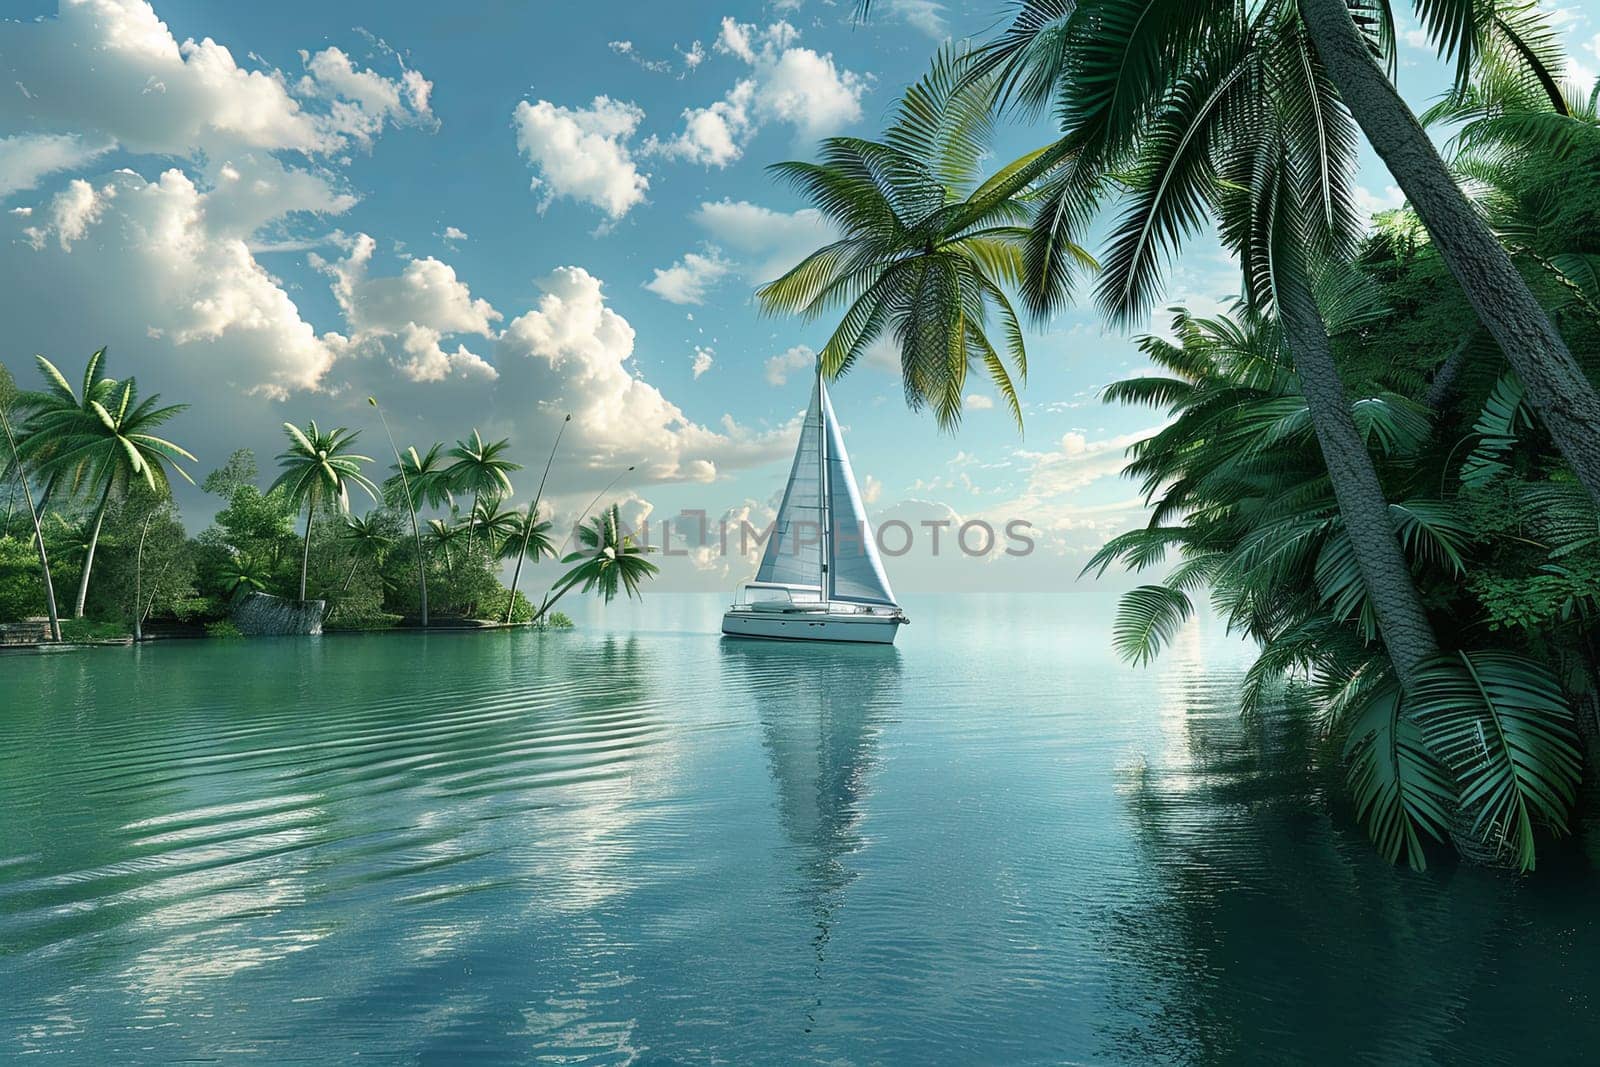 A sailboat peacefully floats on a serene lake, encompassed by lush palm trees, exuding tranquility and elegance.